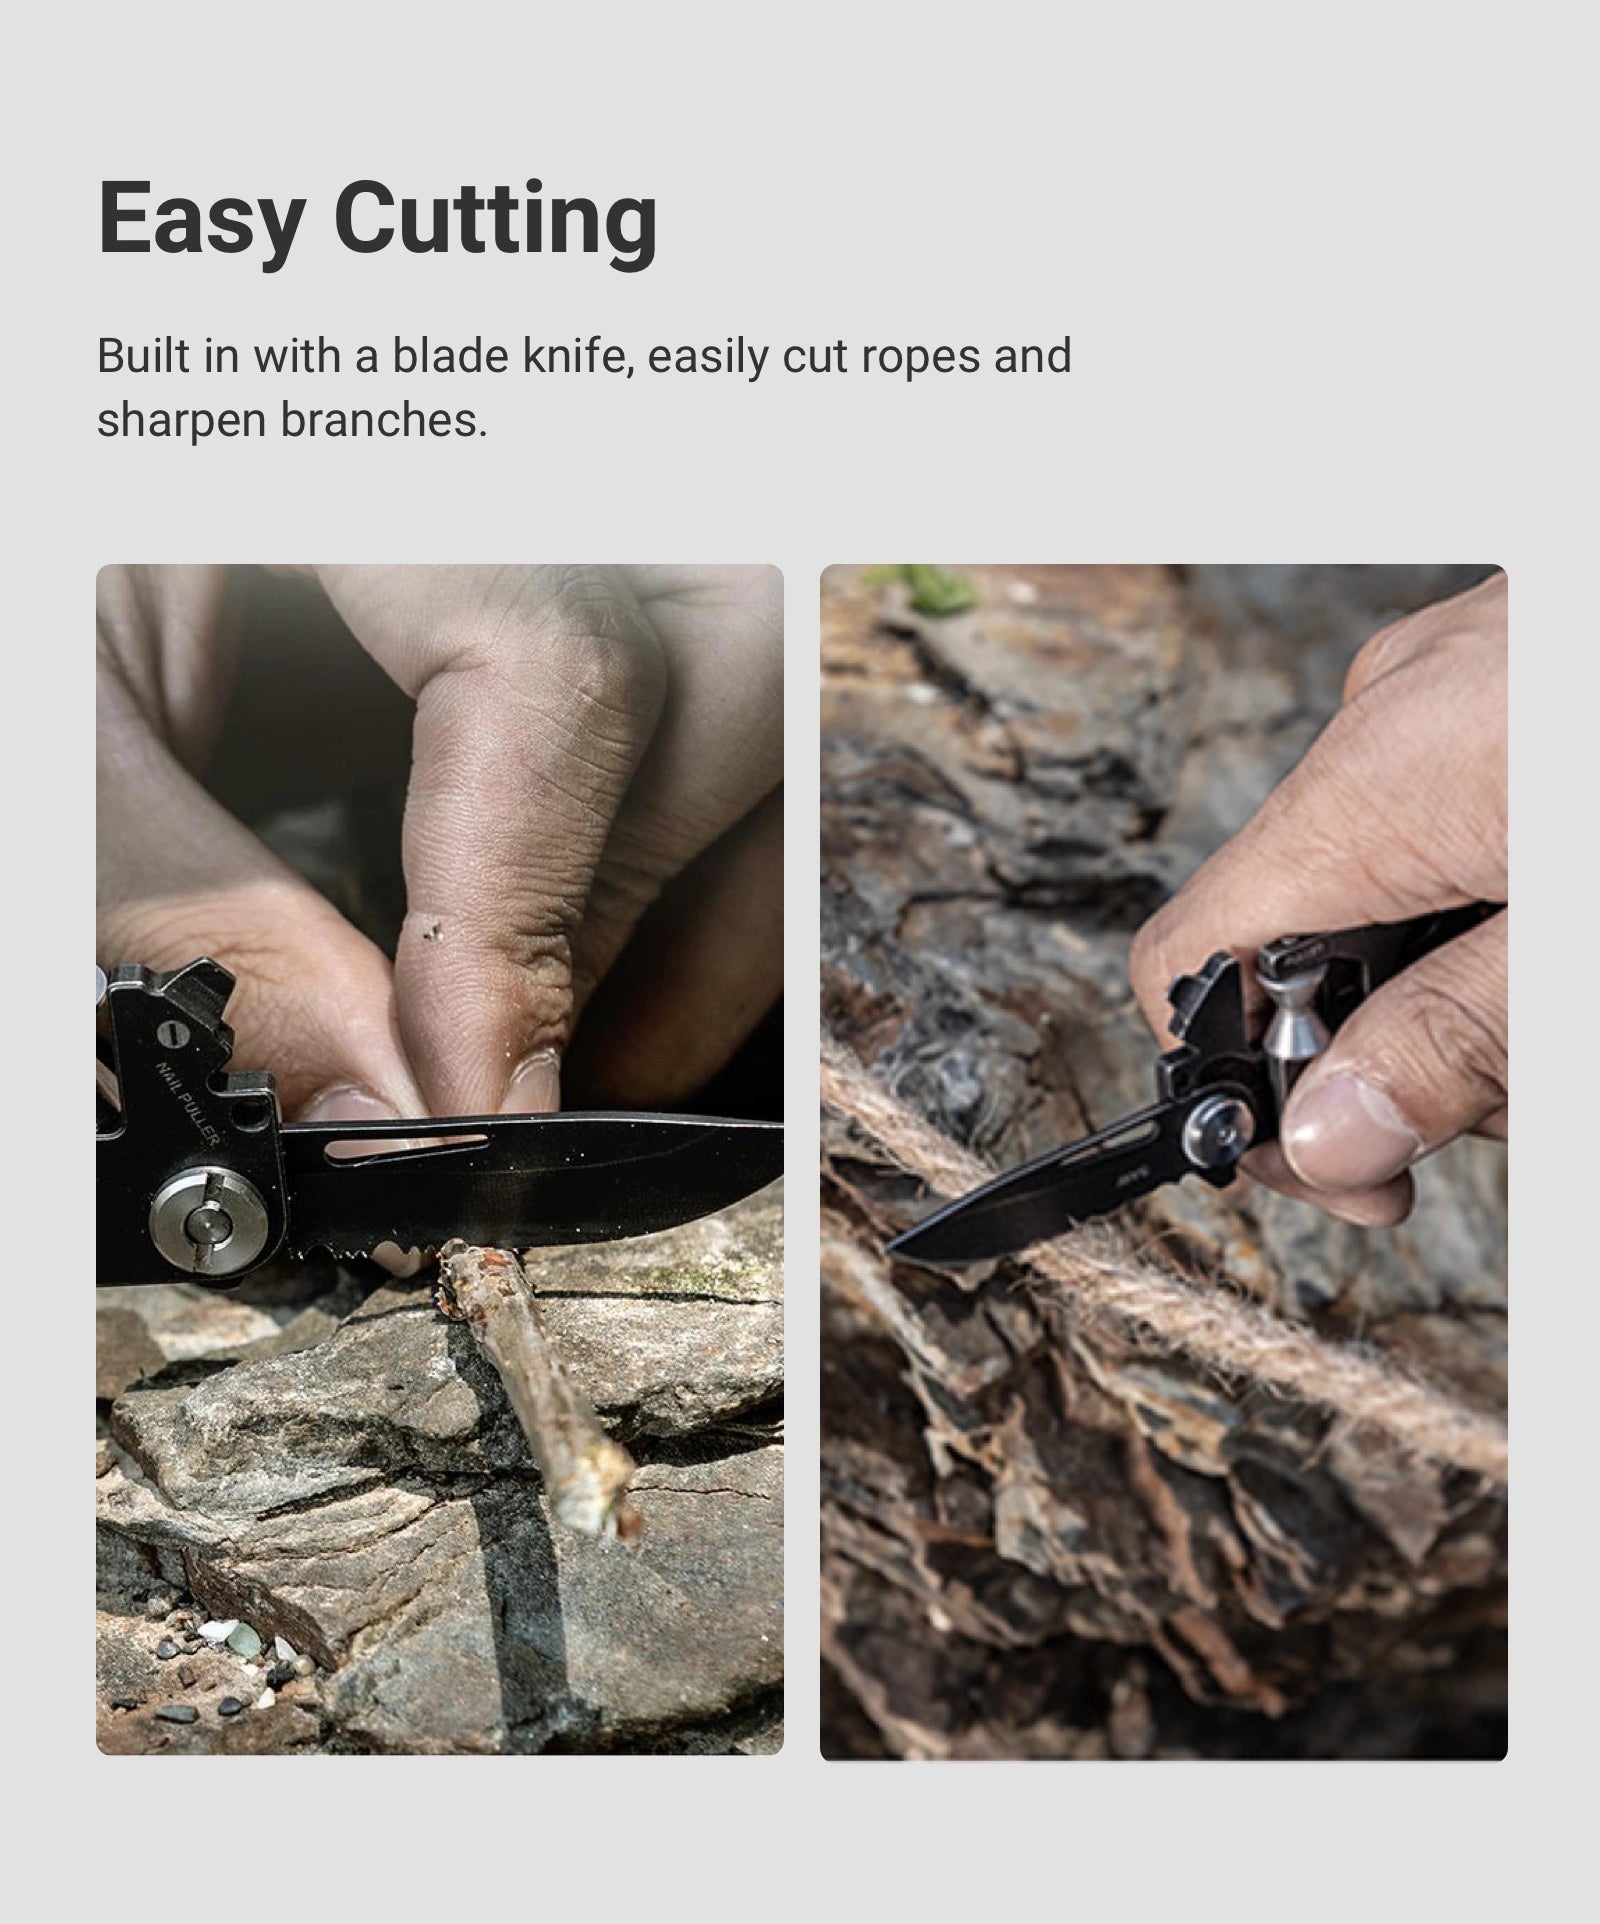 Easy Cutting Built in with a blade knife, easily cut ropes and sharpen branches.